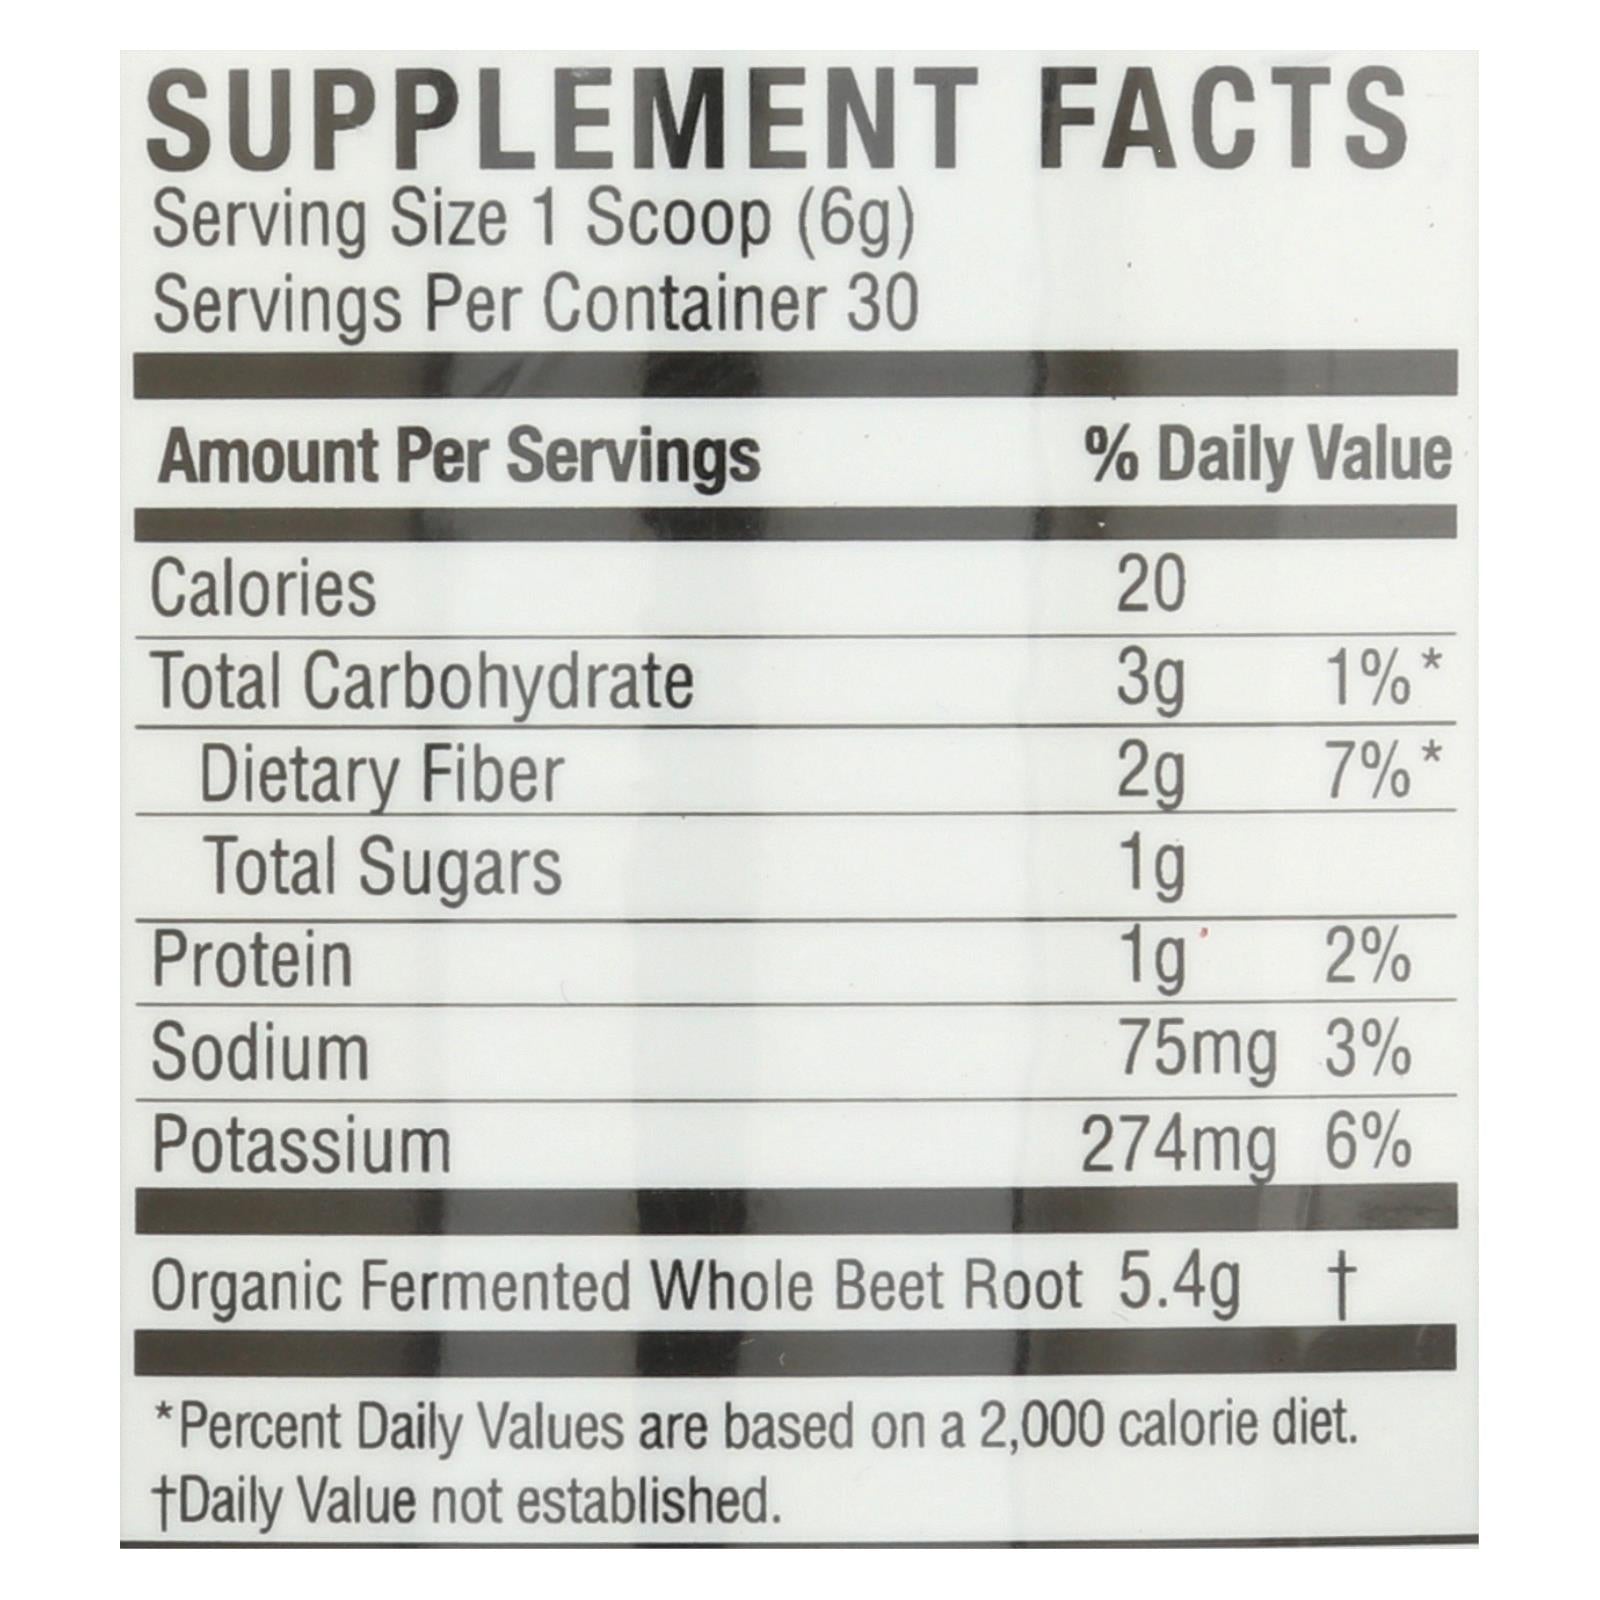 Nature's Answer - Whole Beets Powder Frmntd - 1 Each - 6.34 Oz